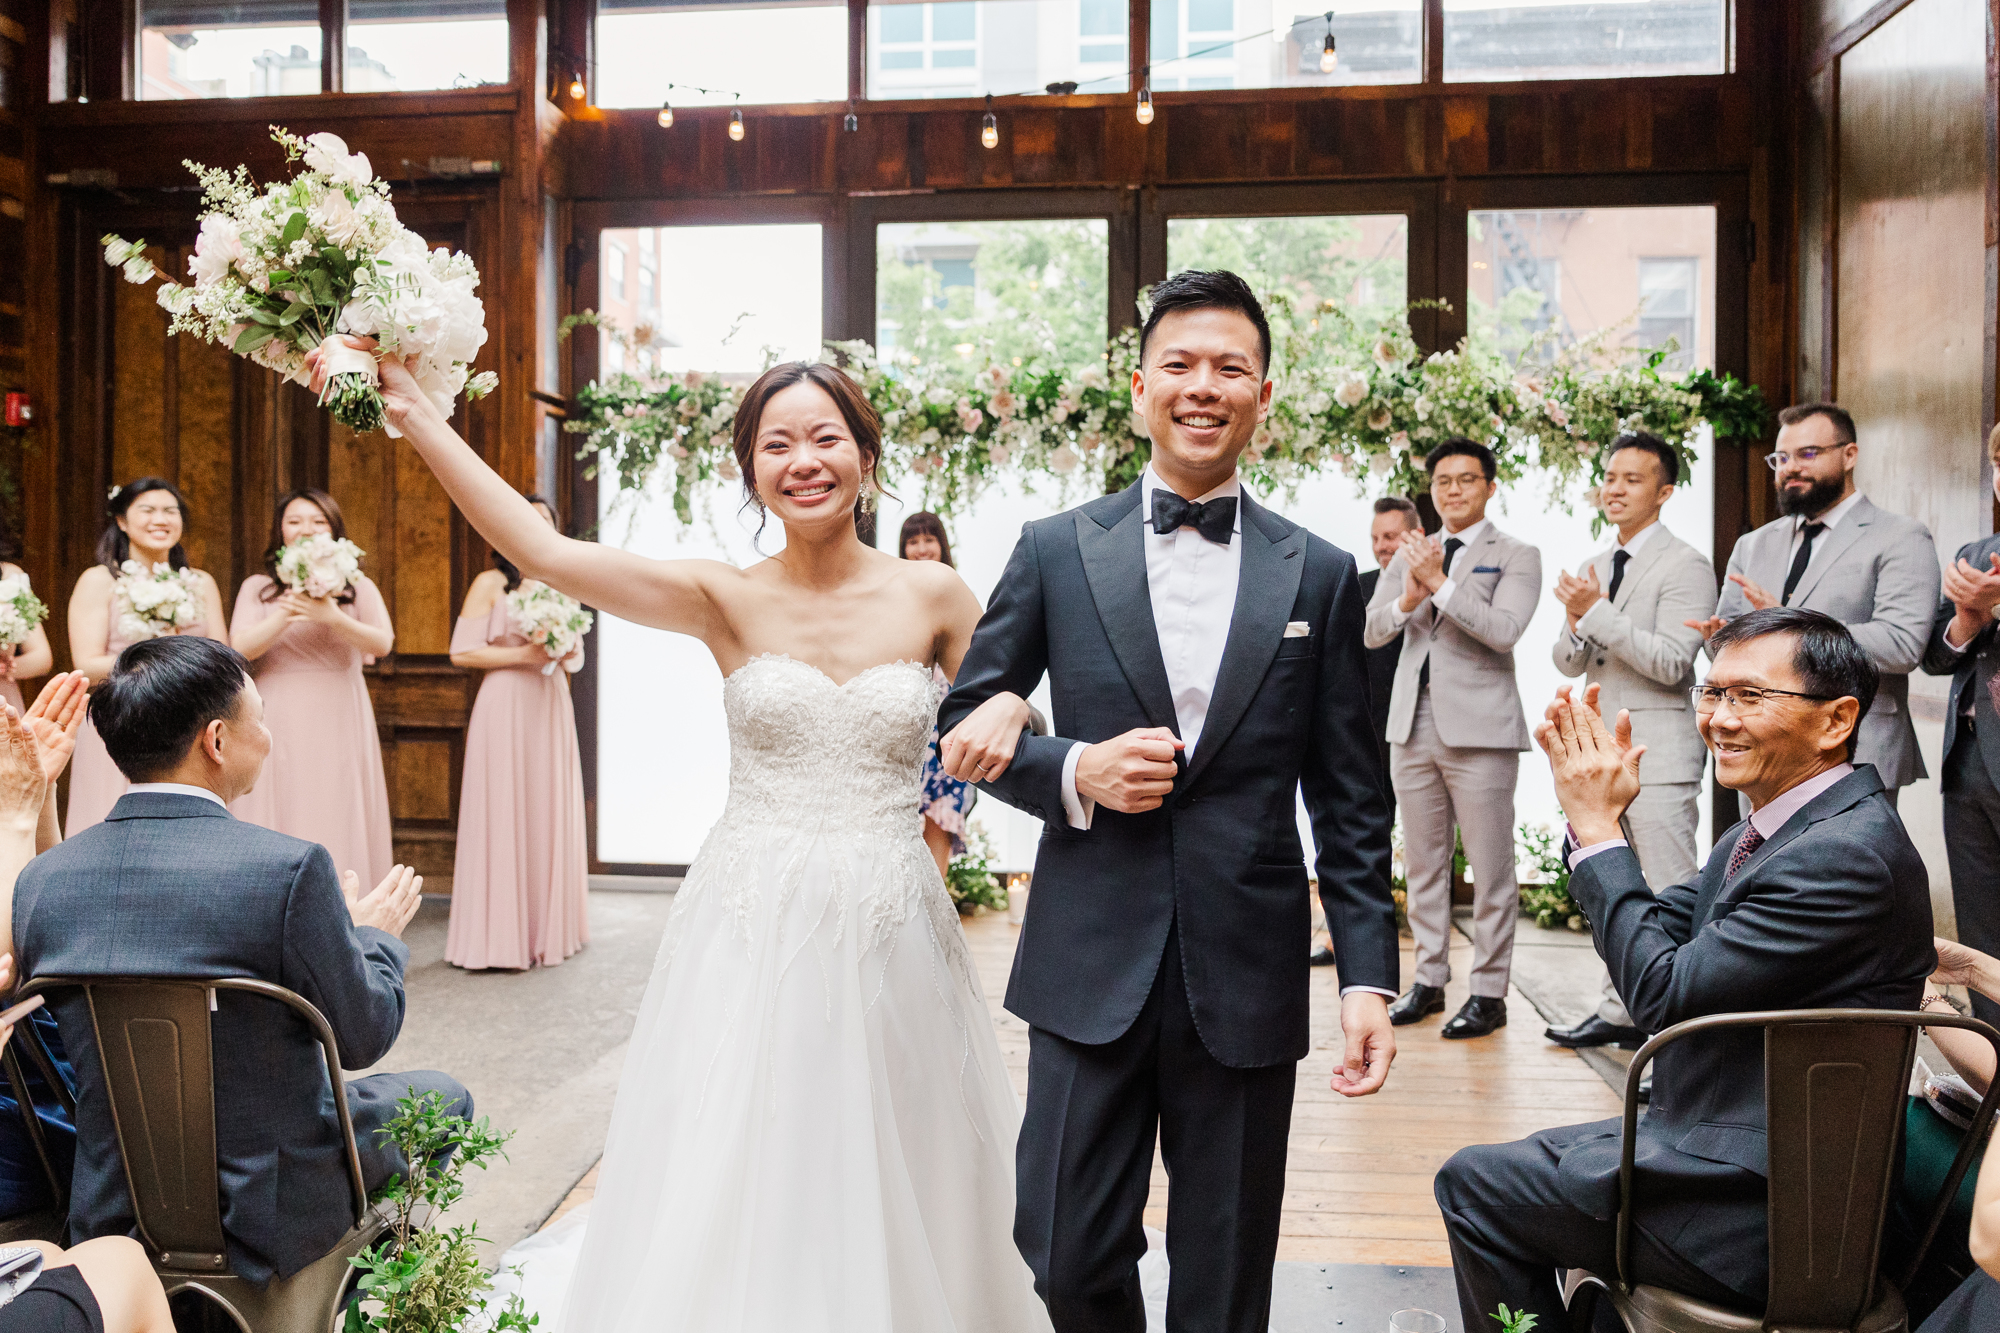 What to Look For In a NYC Wedding Photographer